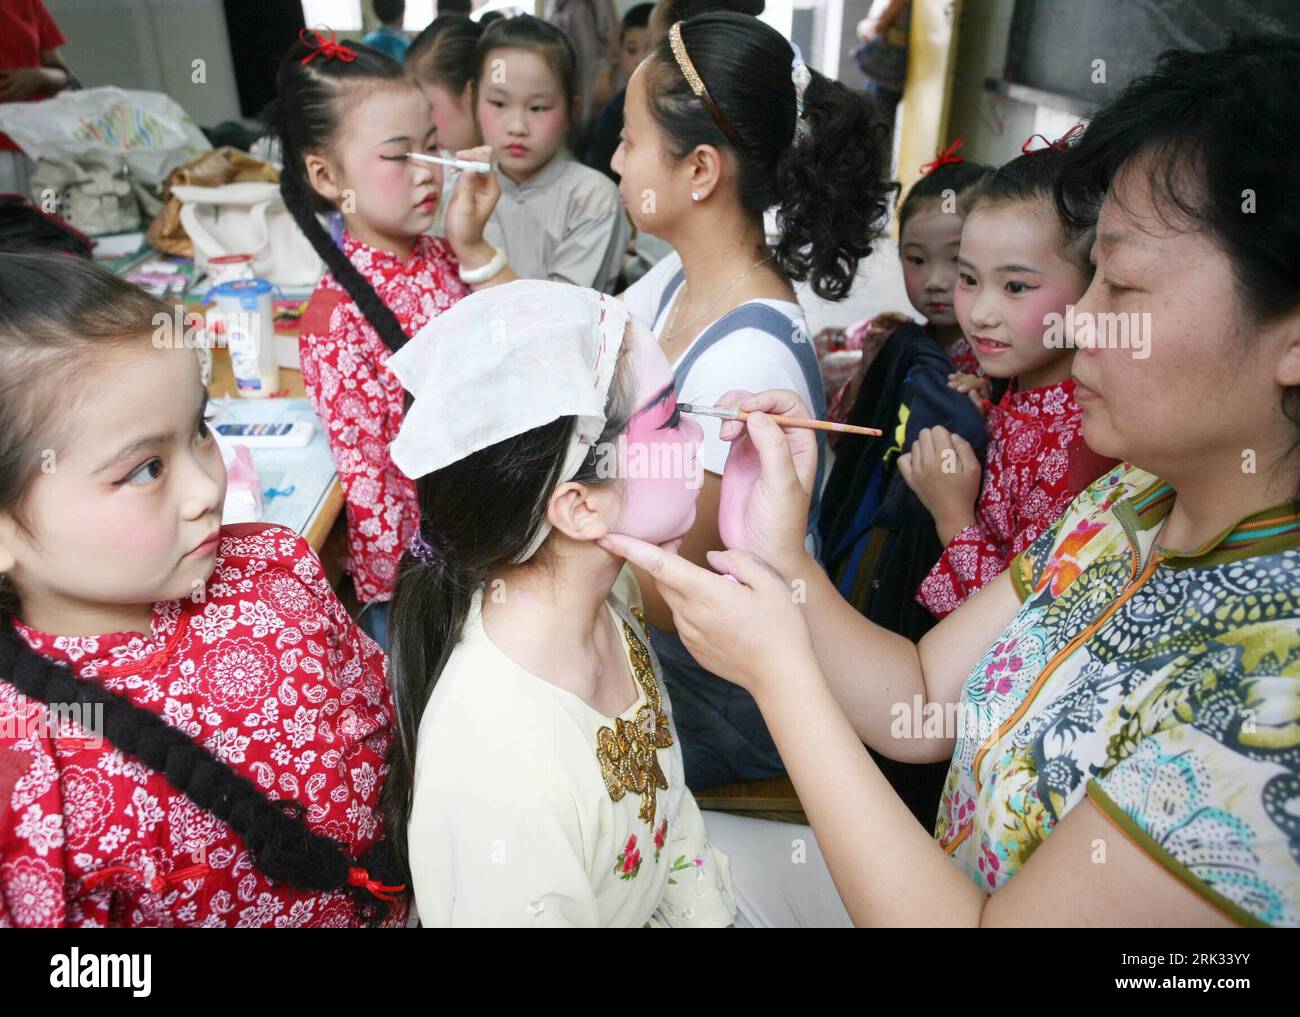 Bildnummer: 53314540  Datum: 02.09.2009  Copyright: imago/Xinhua (090902) -- TAIZHOU (JIANGSU), Sep. 2, 2009 (Xinhua) -- Teachers make face-paintings for pupils prior to their performance of Beijing Opera at Dapu primary school in Taizhou City in east China s Jiangsu Province, Sept. 2, 2009. Schools in China have introduced the learning of traditional Beijing Opera to students for their early understanding of the national treasure of arts. (Xinhua/Gu Jun) (xxh) (6)CHINA-JIANGSU-SCHOOL LEARNING-BEIJING OPERA (CN) PUBLICATIONxNOTxINxCHN China Schule Bildung Kinder Pekingoper Peking Oper Theater Stock Photo